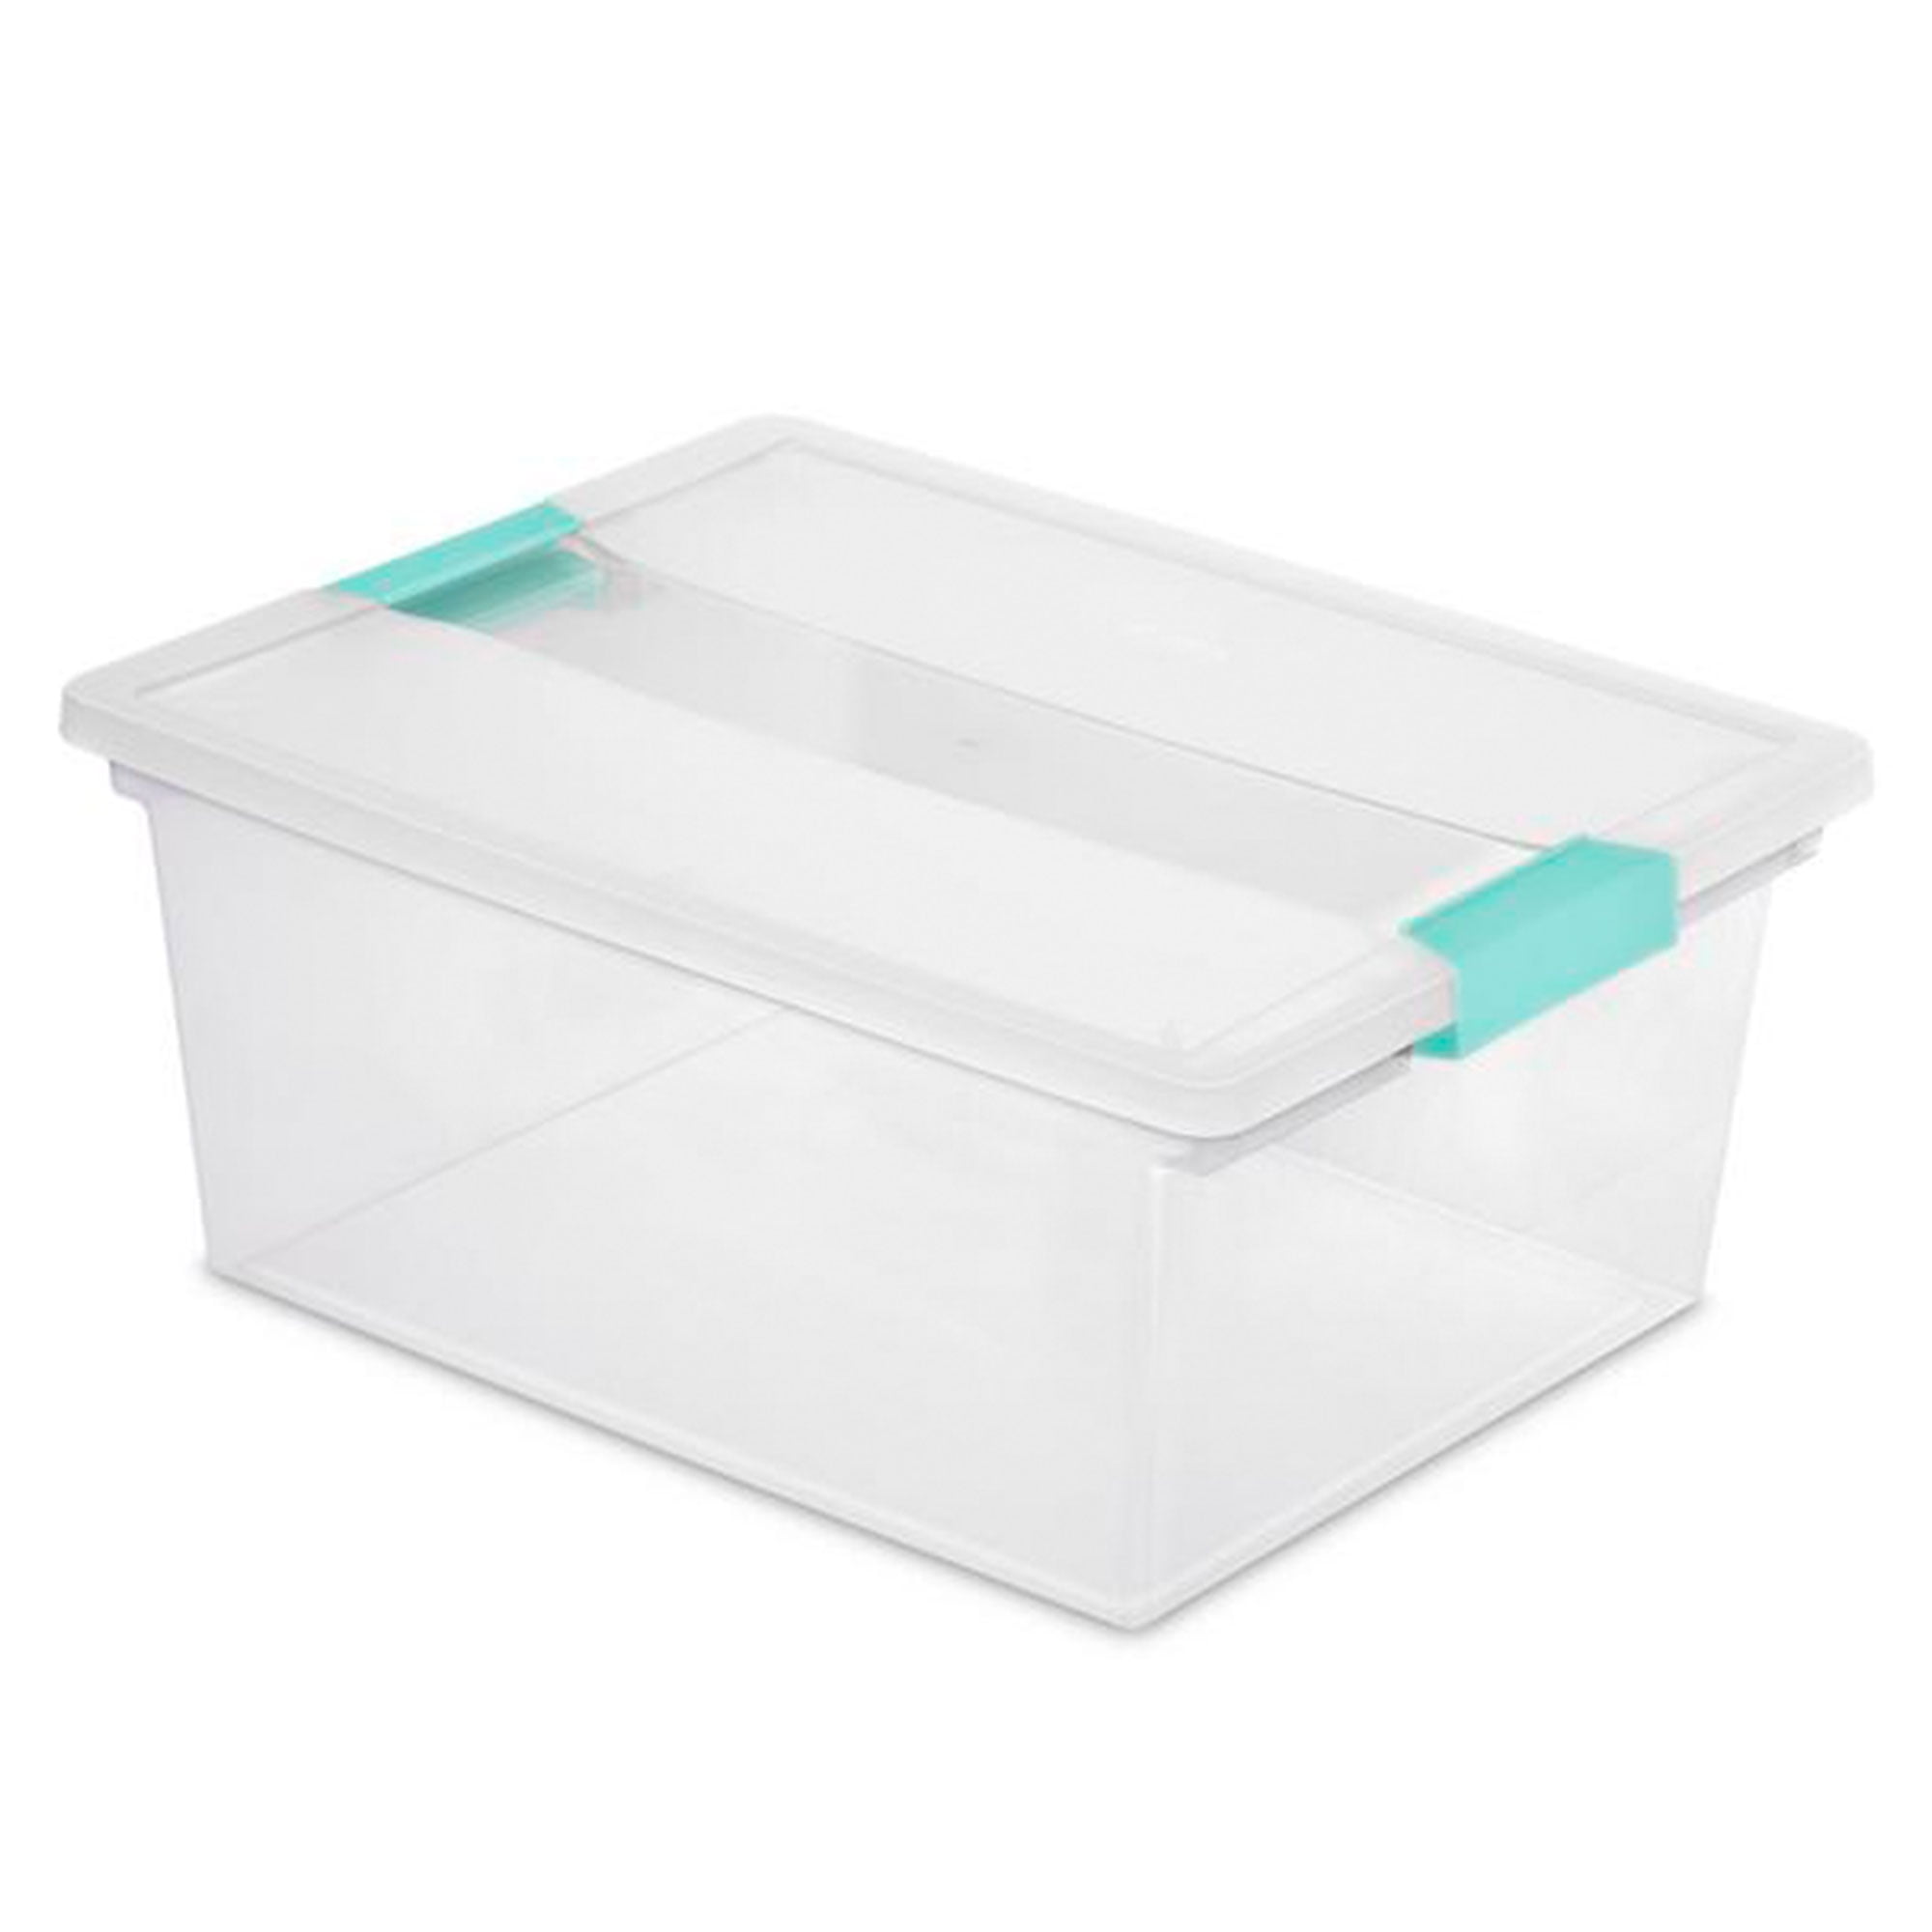 Sterilite Deep Clip Box, Stackable Storage Bin with Latching Lid, for Home,  Office, School, Organize…See more Sterilite Deep Clip Box, Stackable